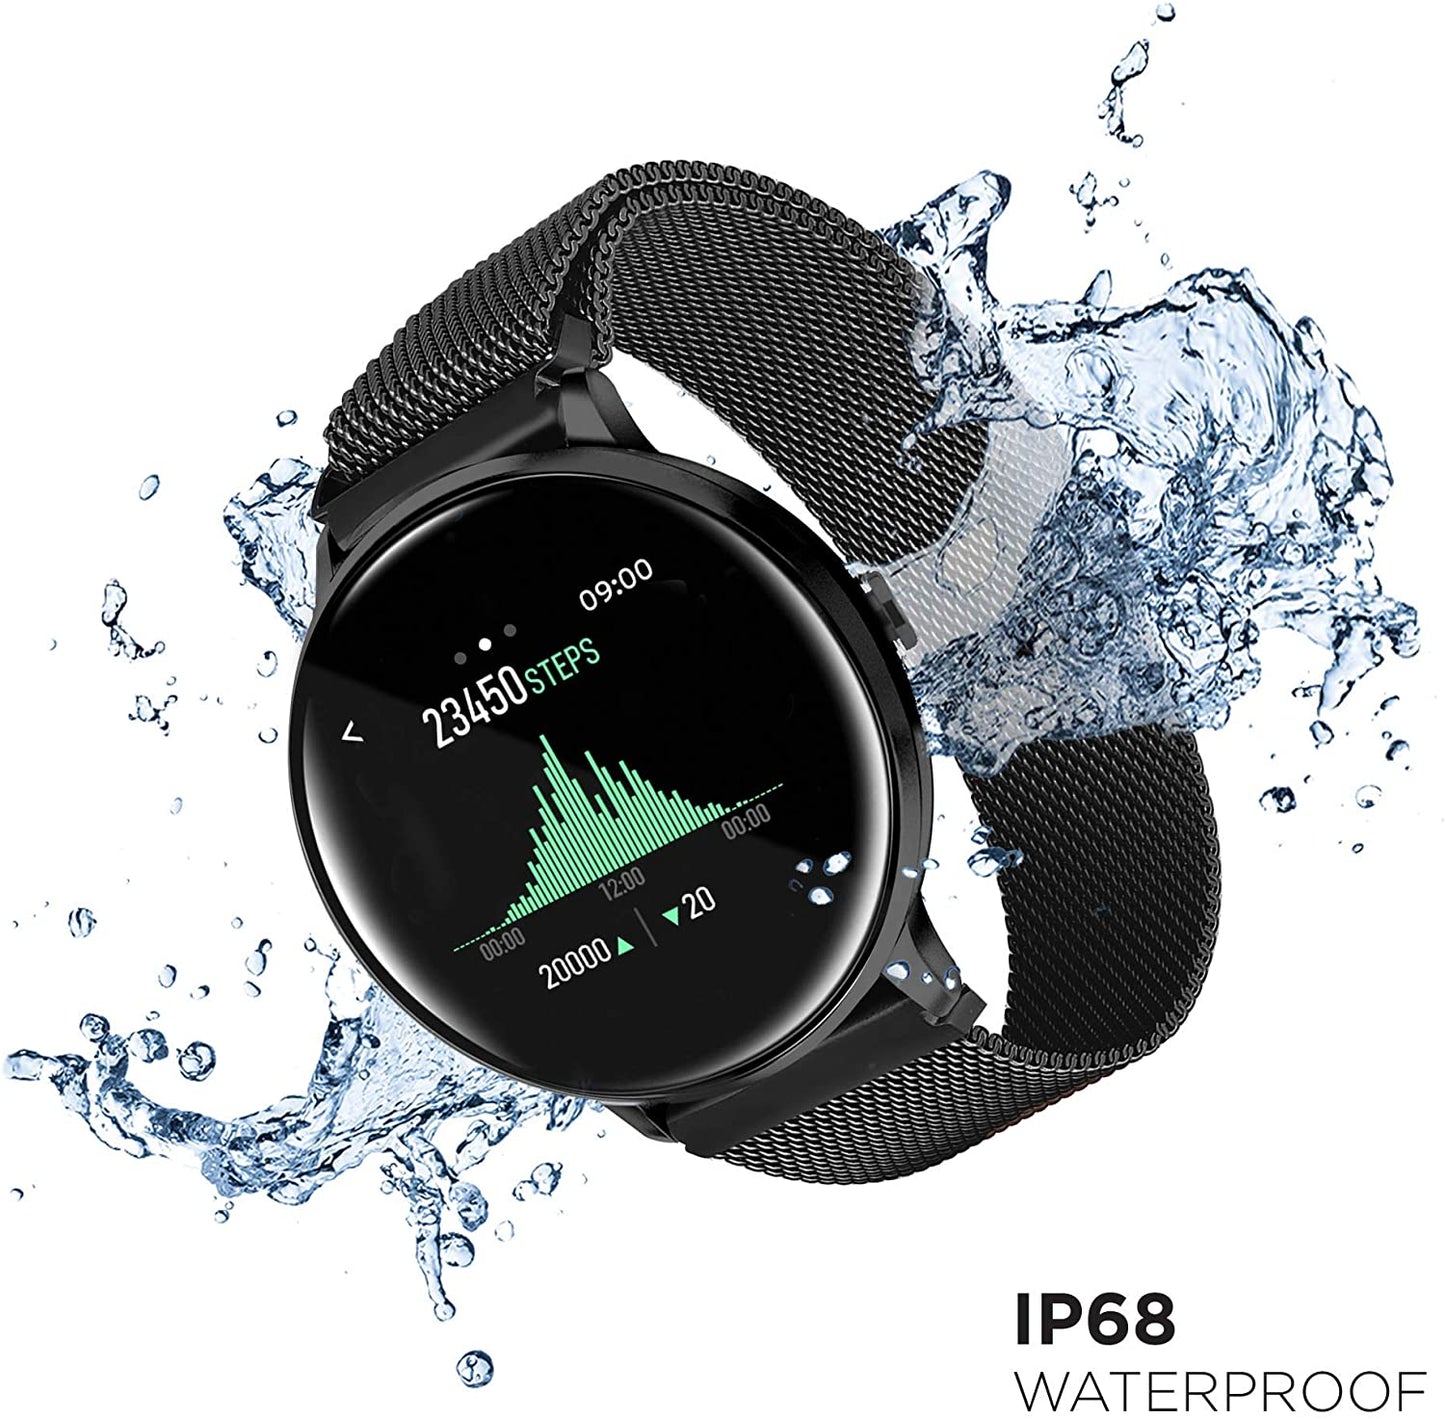 iTouch Air 3 Smartwatch Fitness Tracker, Heart Rate, Step Counter, Sleep Monitor, Compatible with iPhone and Android